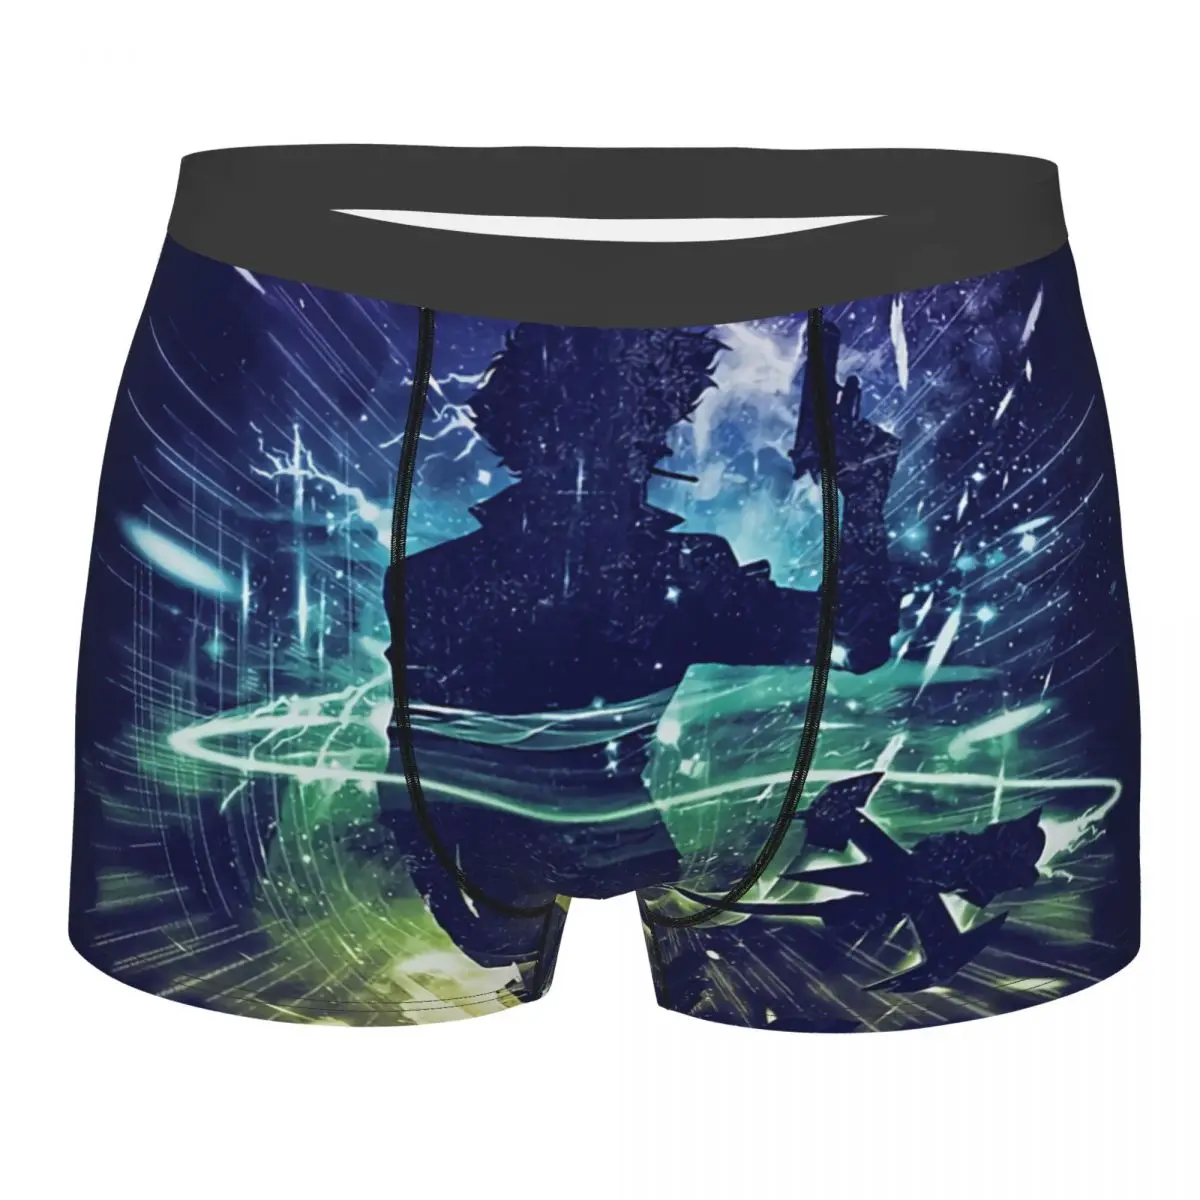 

Cowboy Bebop Knockin At Heaven's Door Man's Boxer Briefs Underpants Hip Hop Highly Breathable High Quality Sexy Shorts Gift Idea